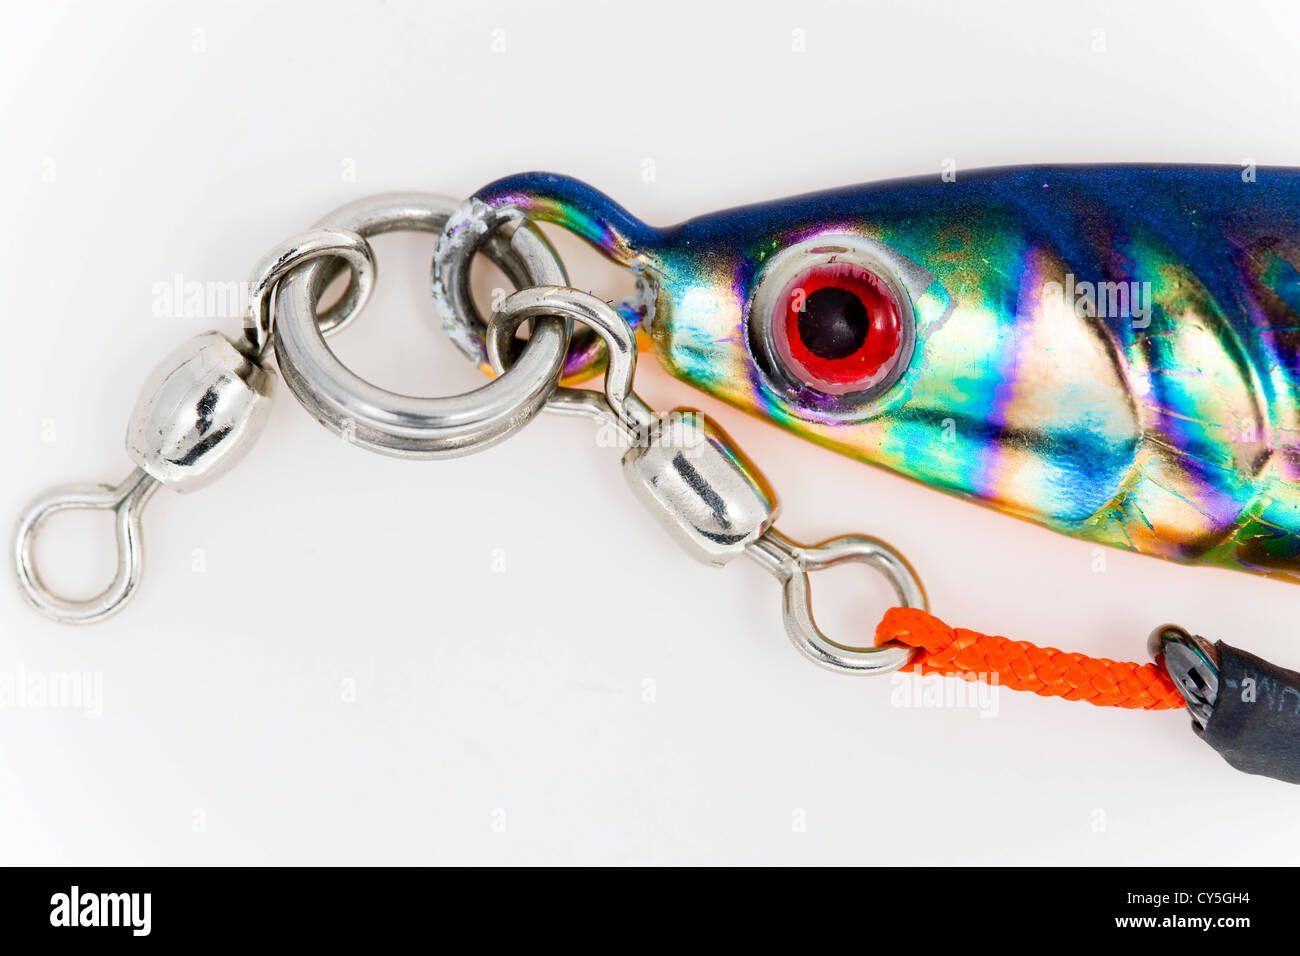 Deep Sea Fishing Jig rigged with assist hook on white background. Stock Photo